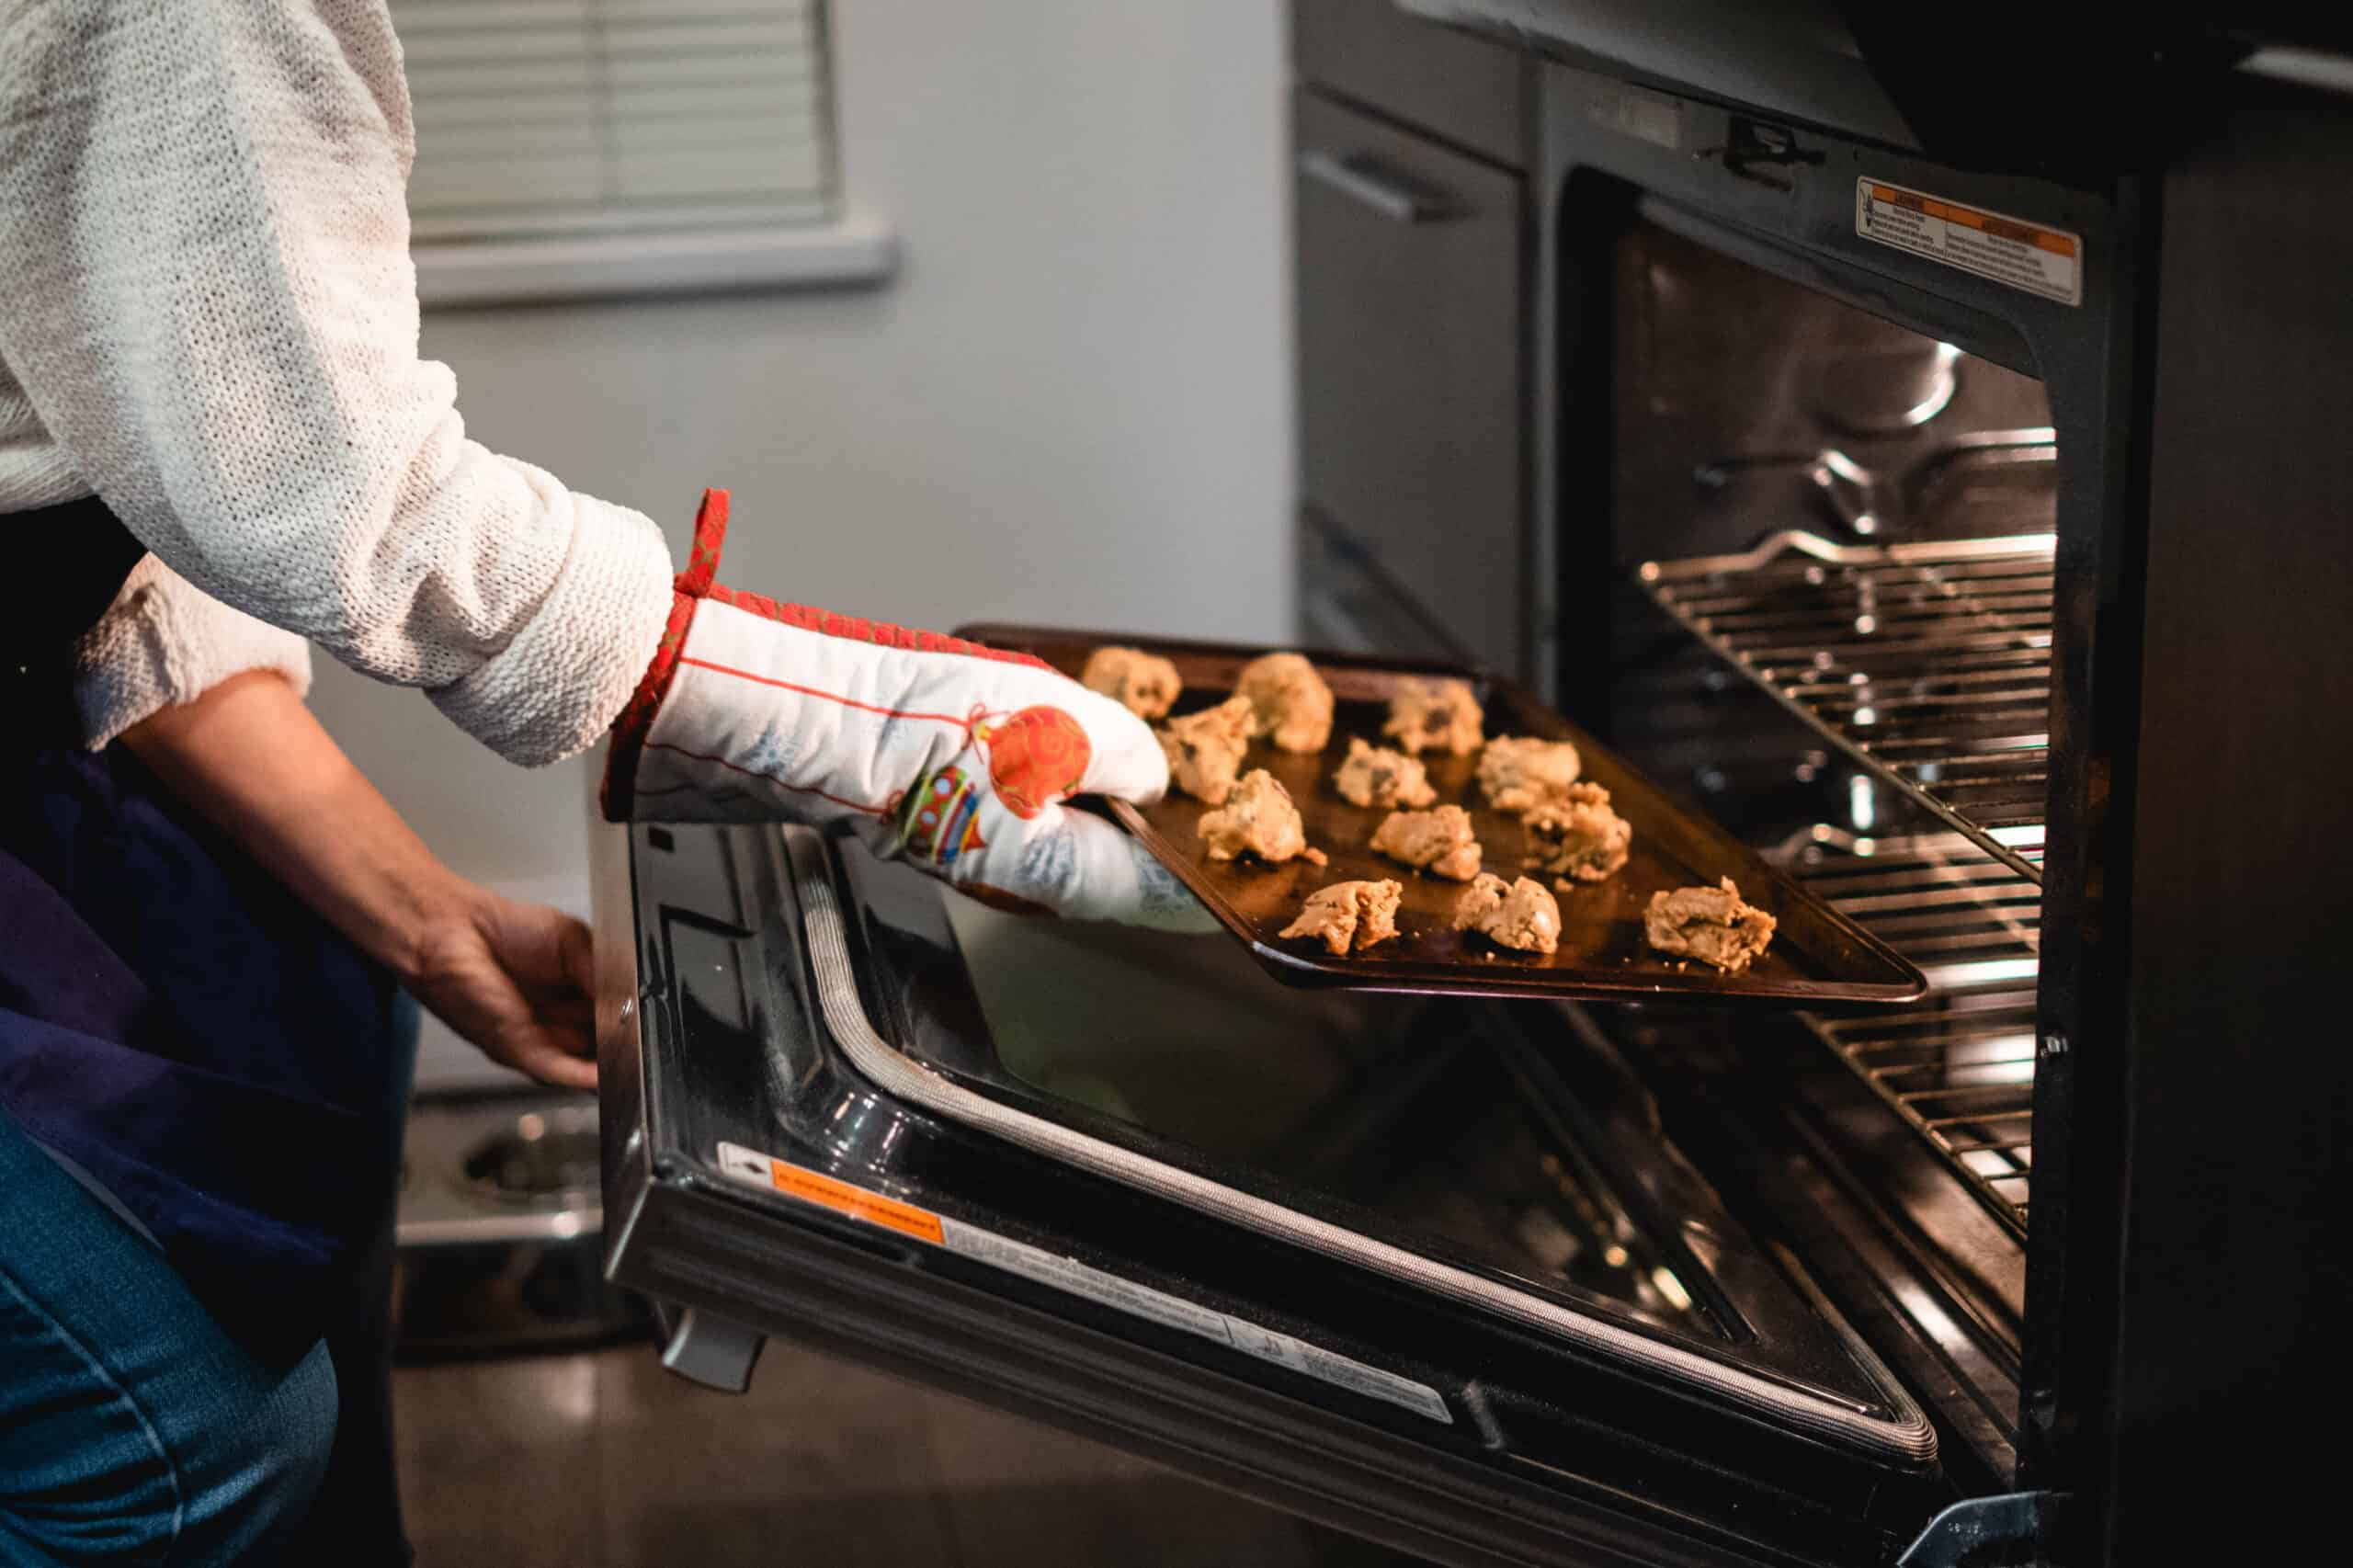 Using Oven Cleaners Safely